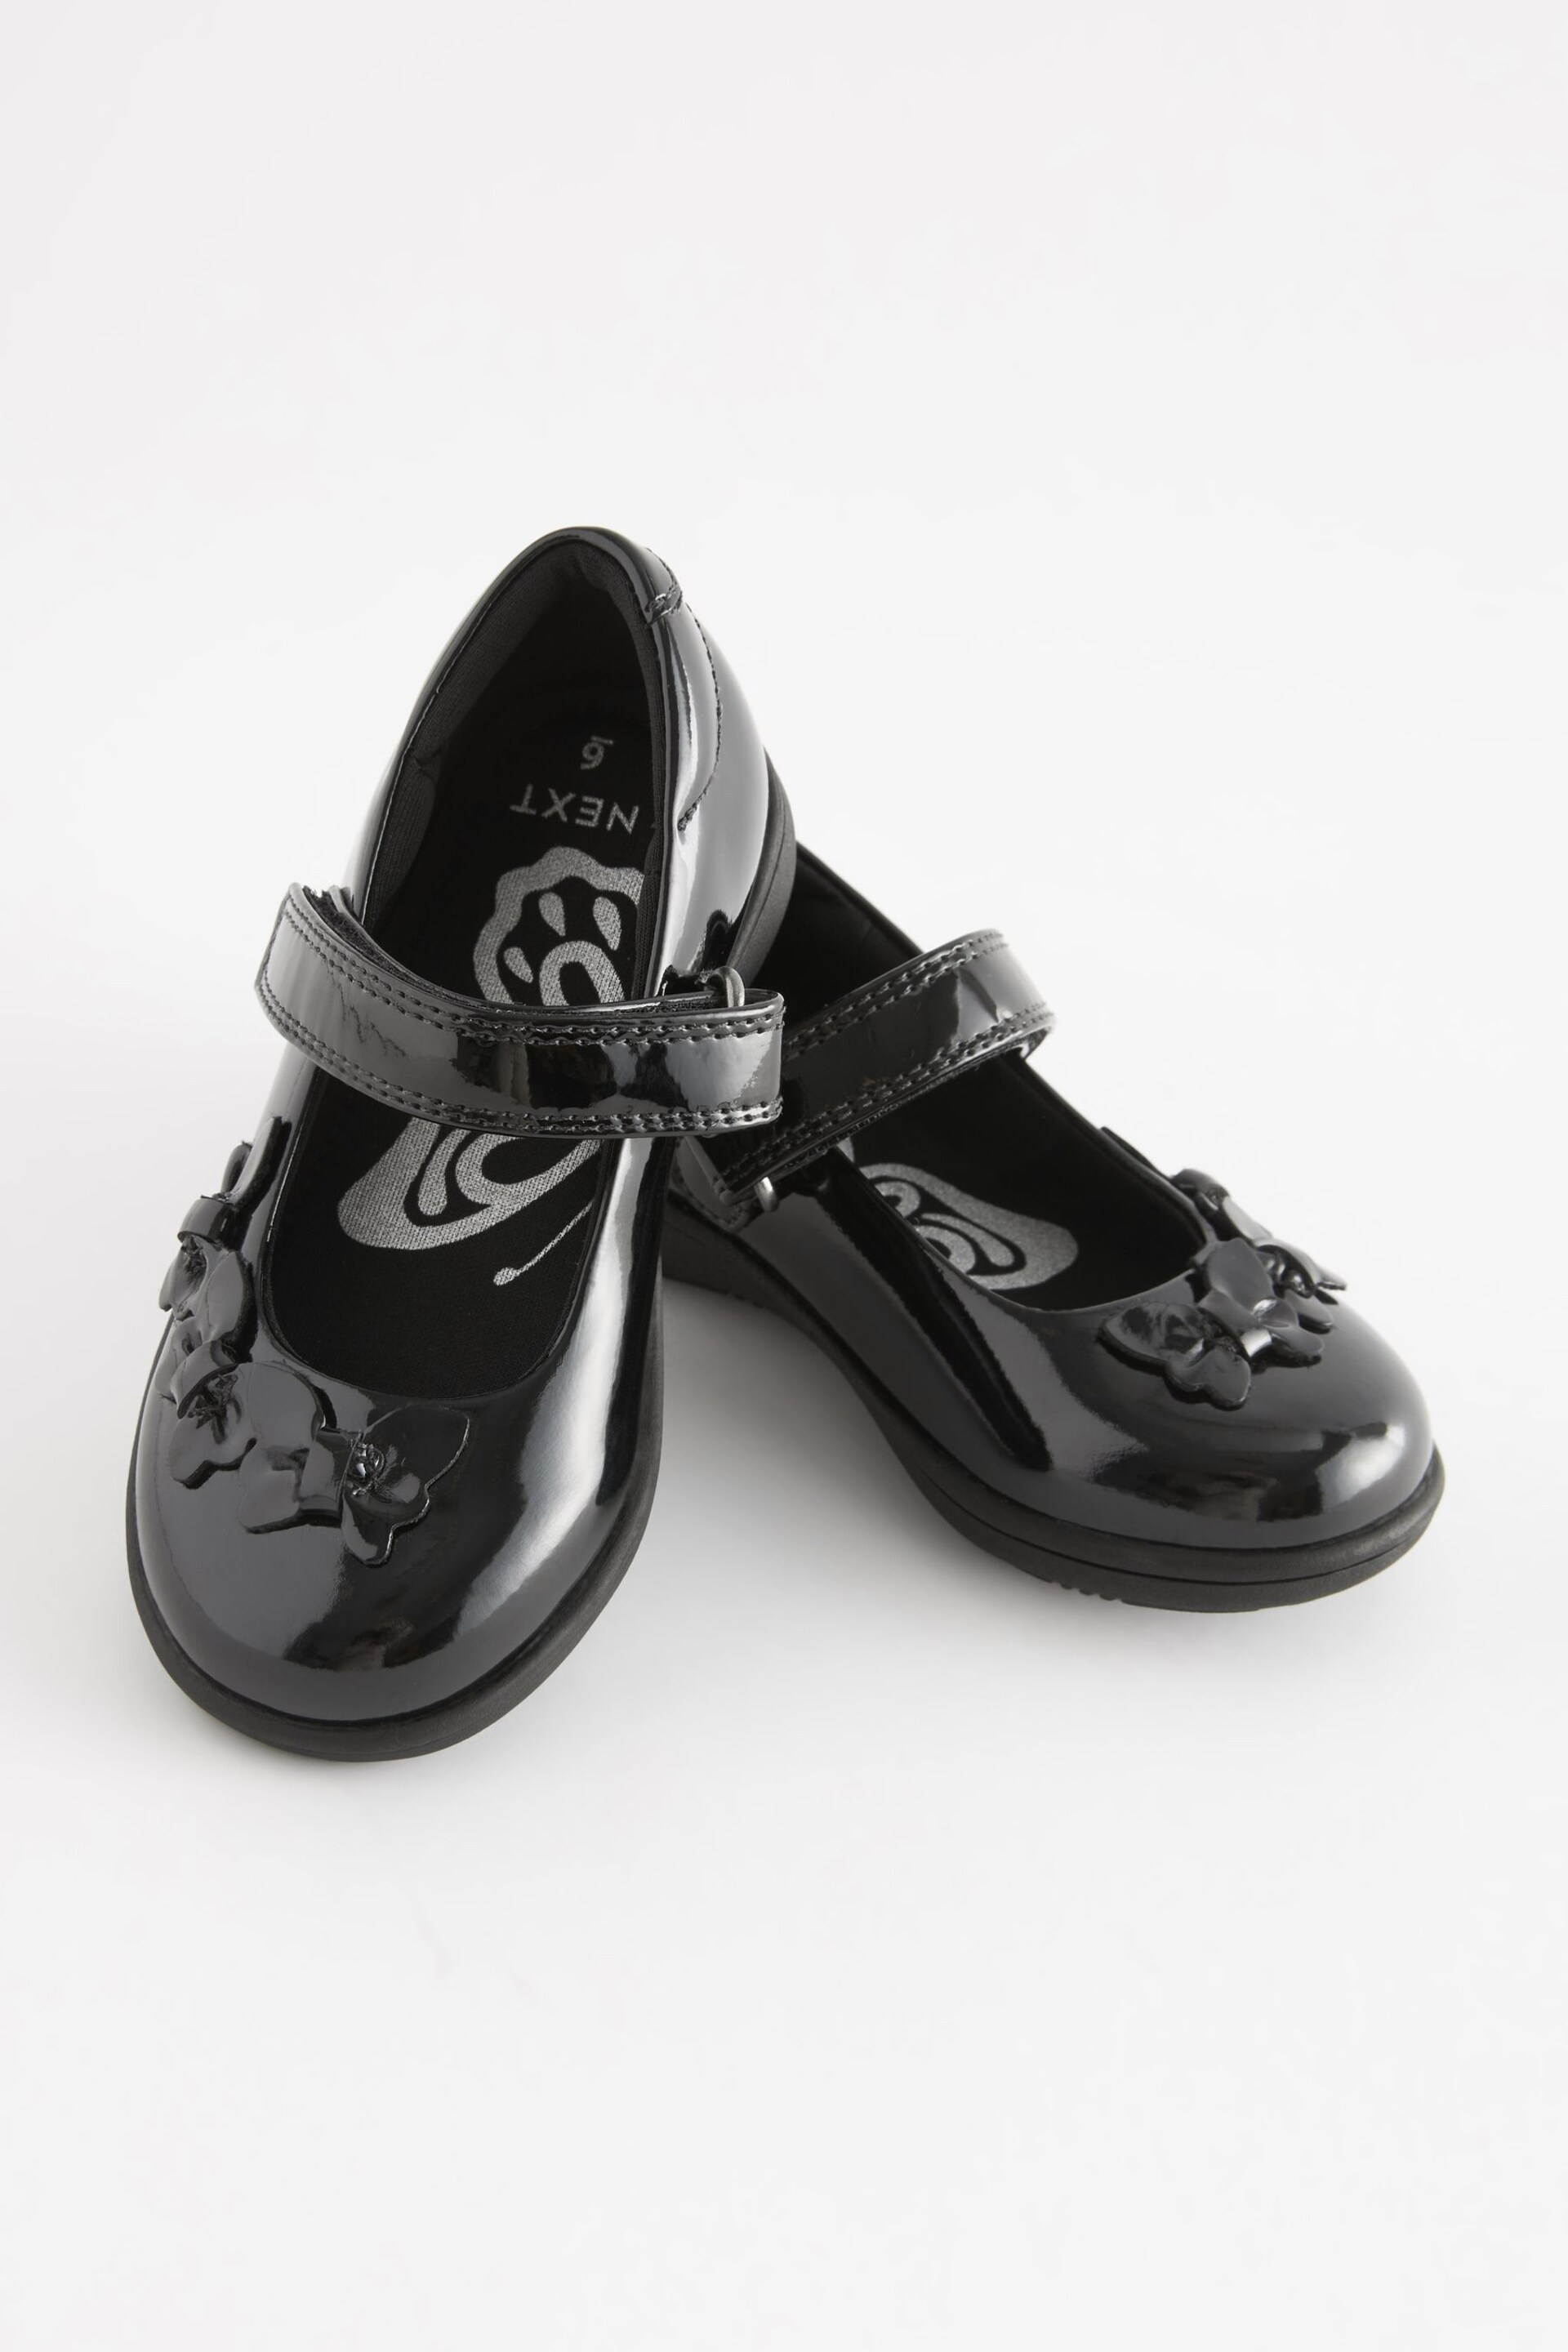 Black Patent Standard Fit (F) School Junior Butterfly Mary Jane Shoes - Image 1 of 8